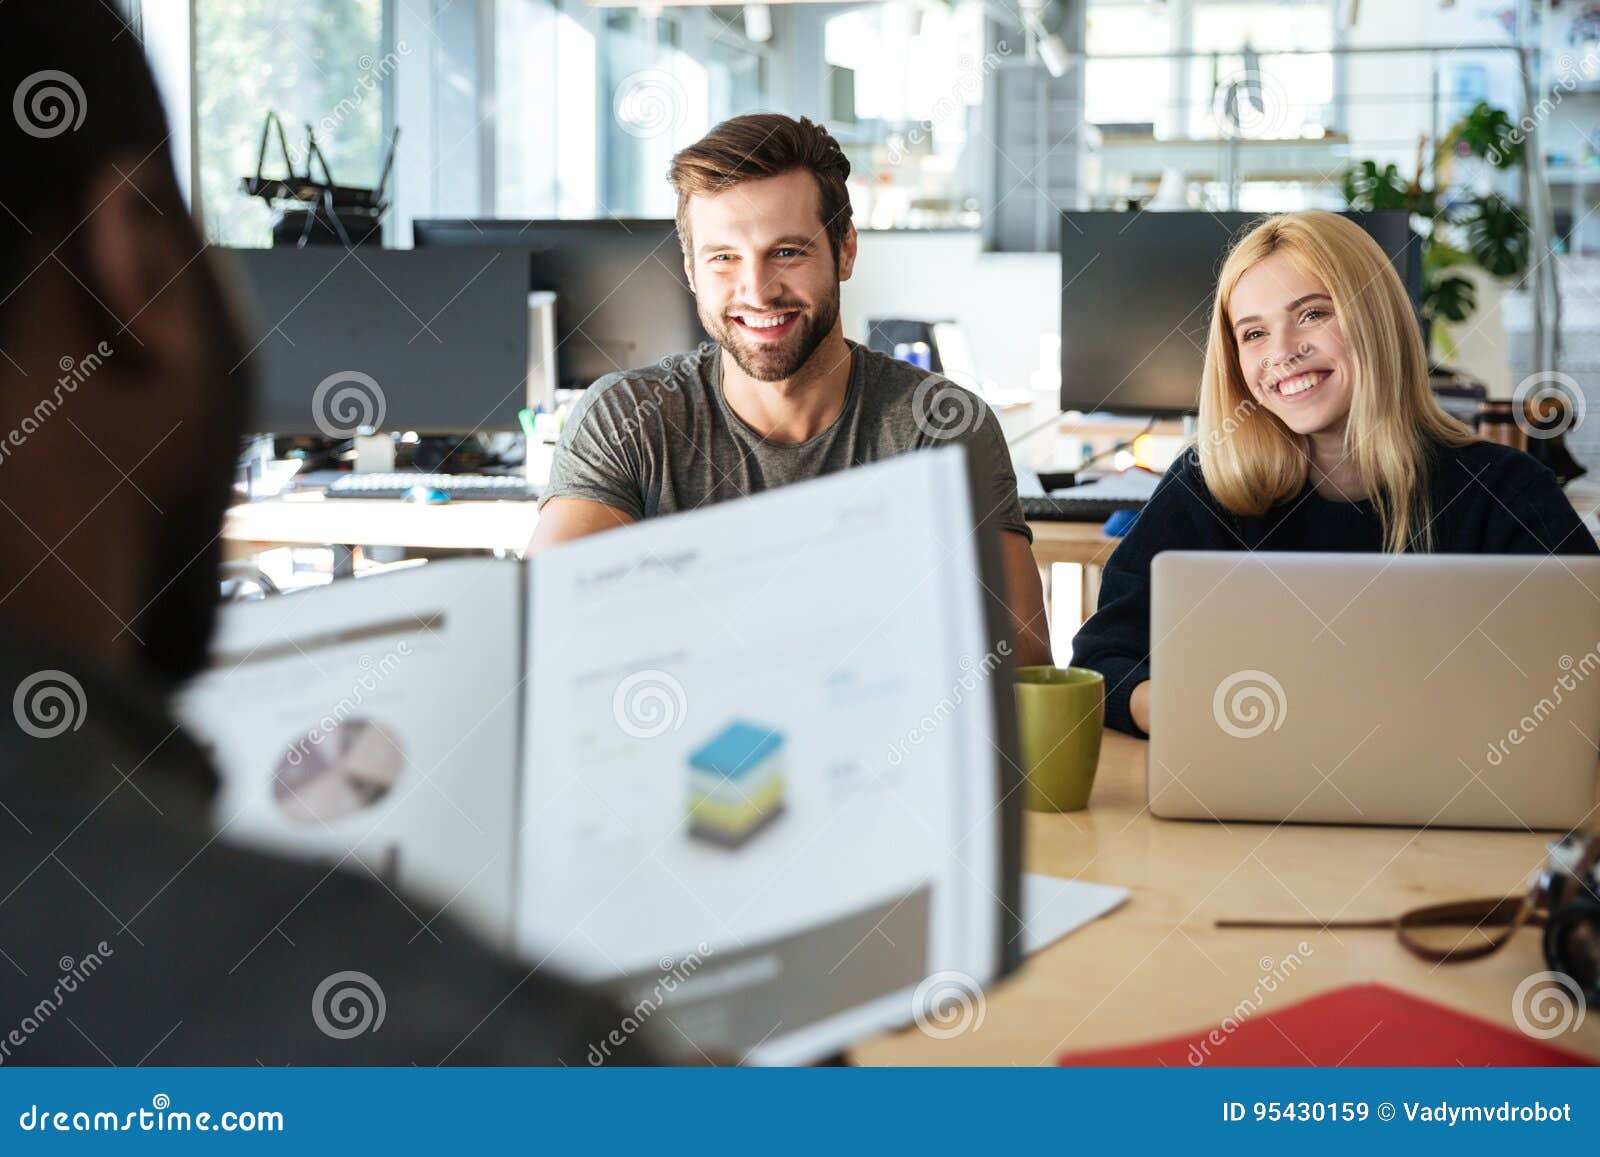 happy young colleagues sitting in office coworking